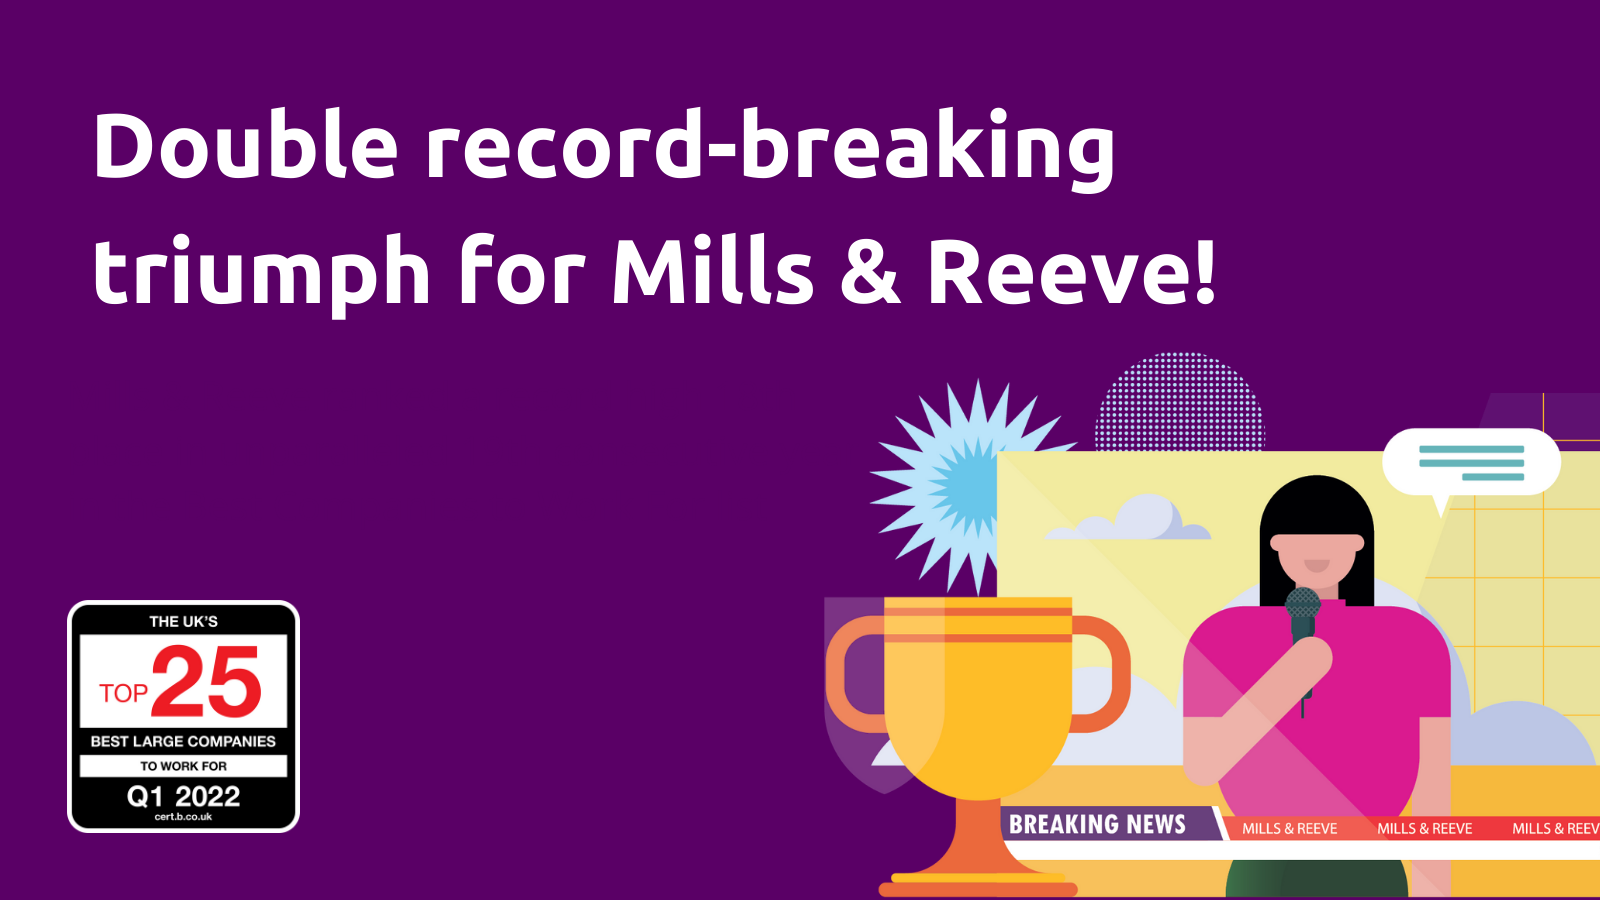 Double record-breaking triumph for Mills & Reeve 